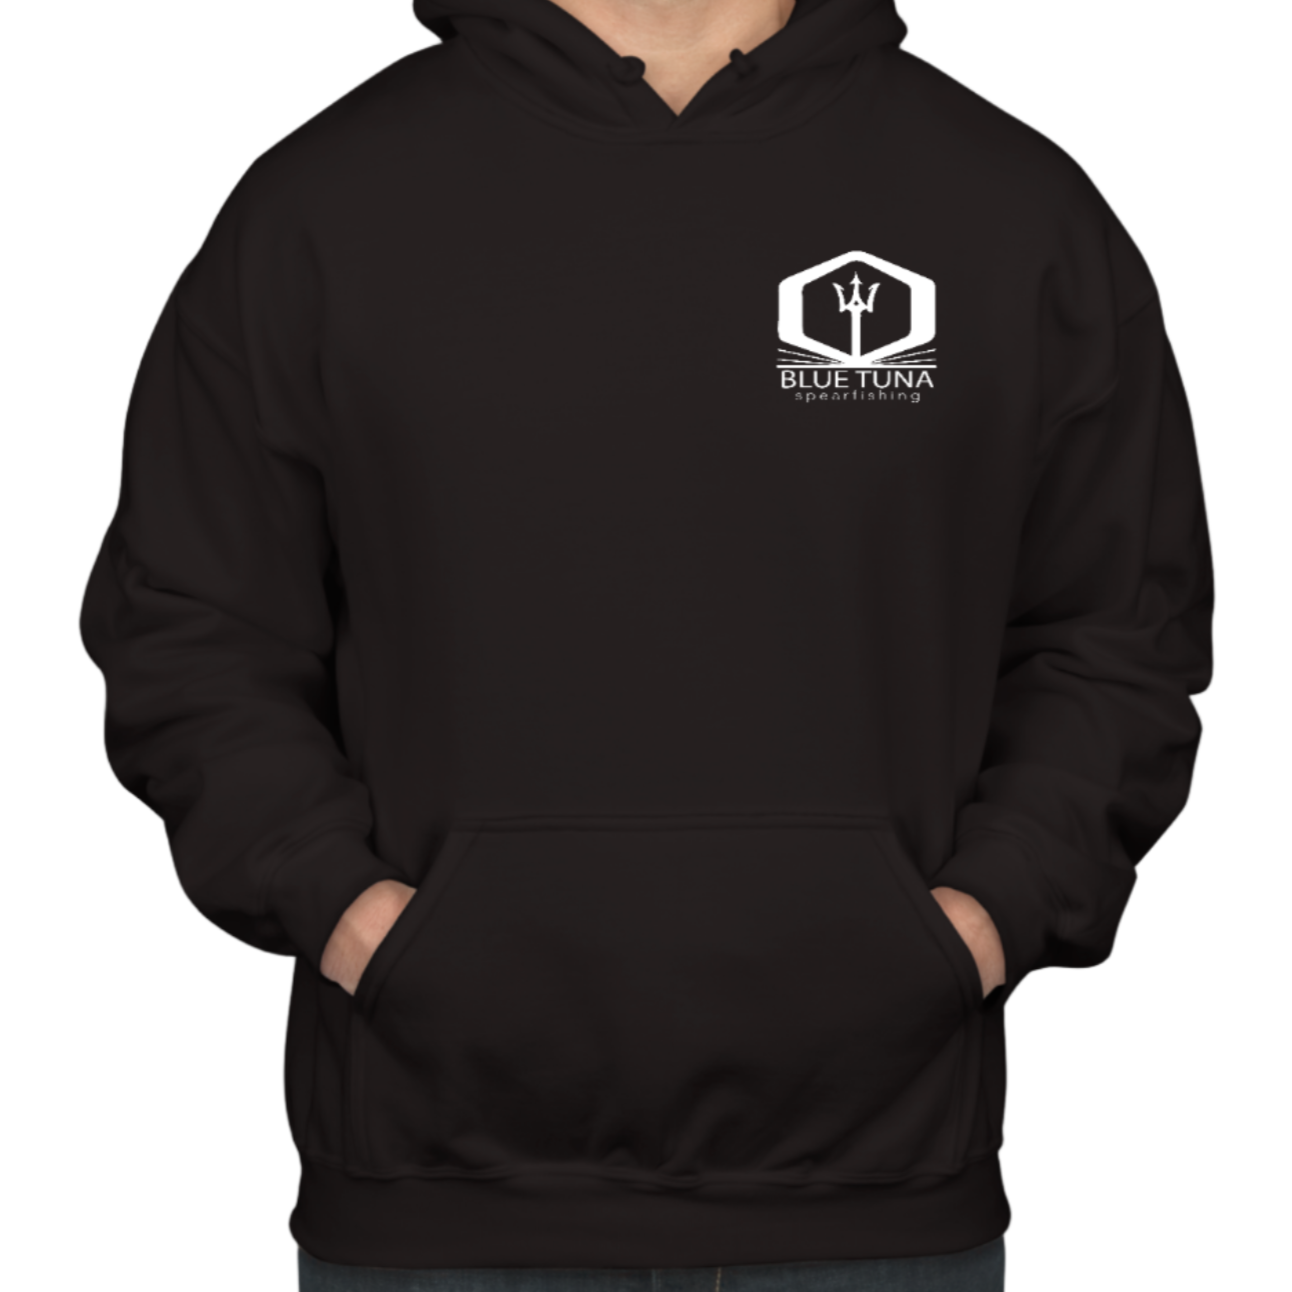 BTS Hoodie with Anchor Design - Front view- Blue Tuna Spearfishing Co